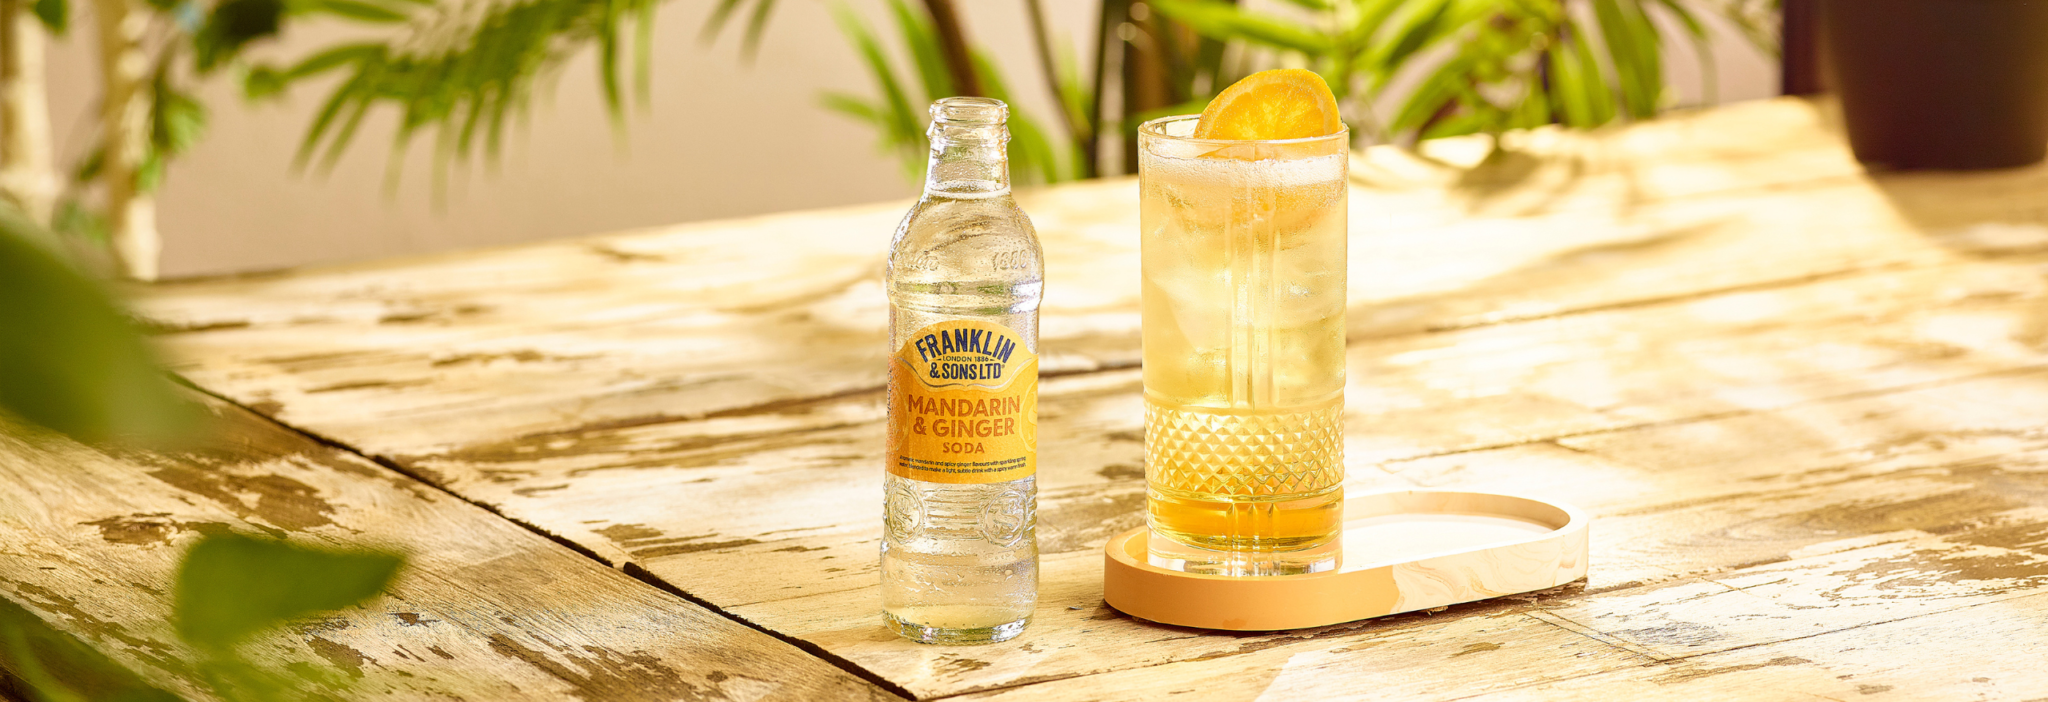 Scotch and mandarin cocktail next to Franklin & Sons Mandarin & Ginger Soda | Franklin & Sons